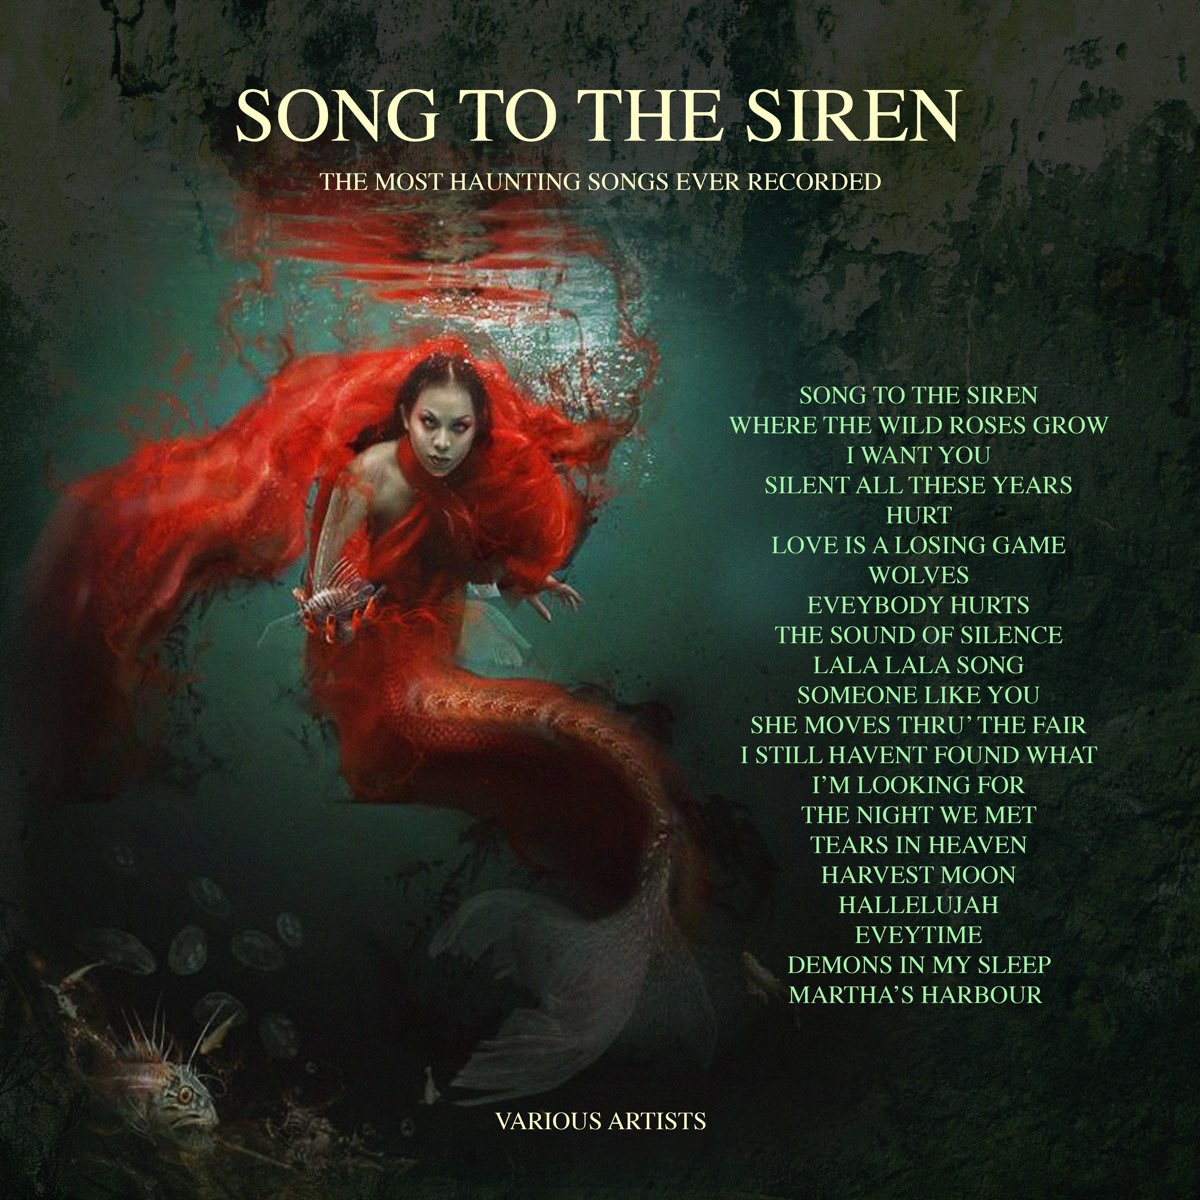 ‎Song to the Siren - The Most Haunting Songs Ever Recorded - Album by ...